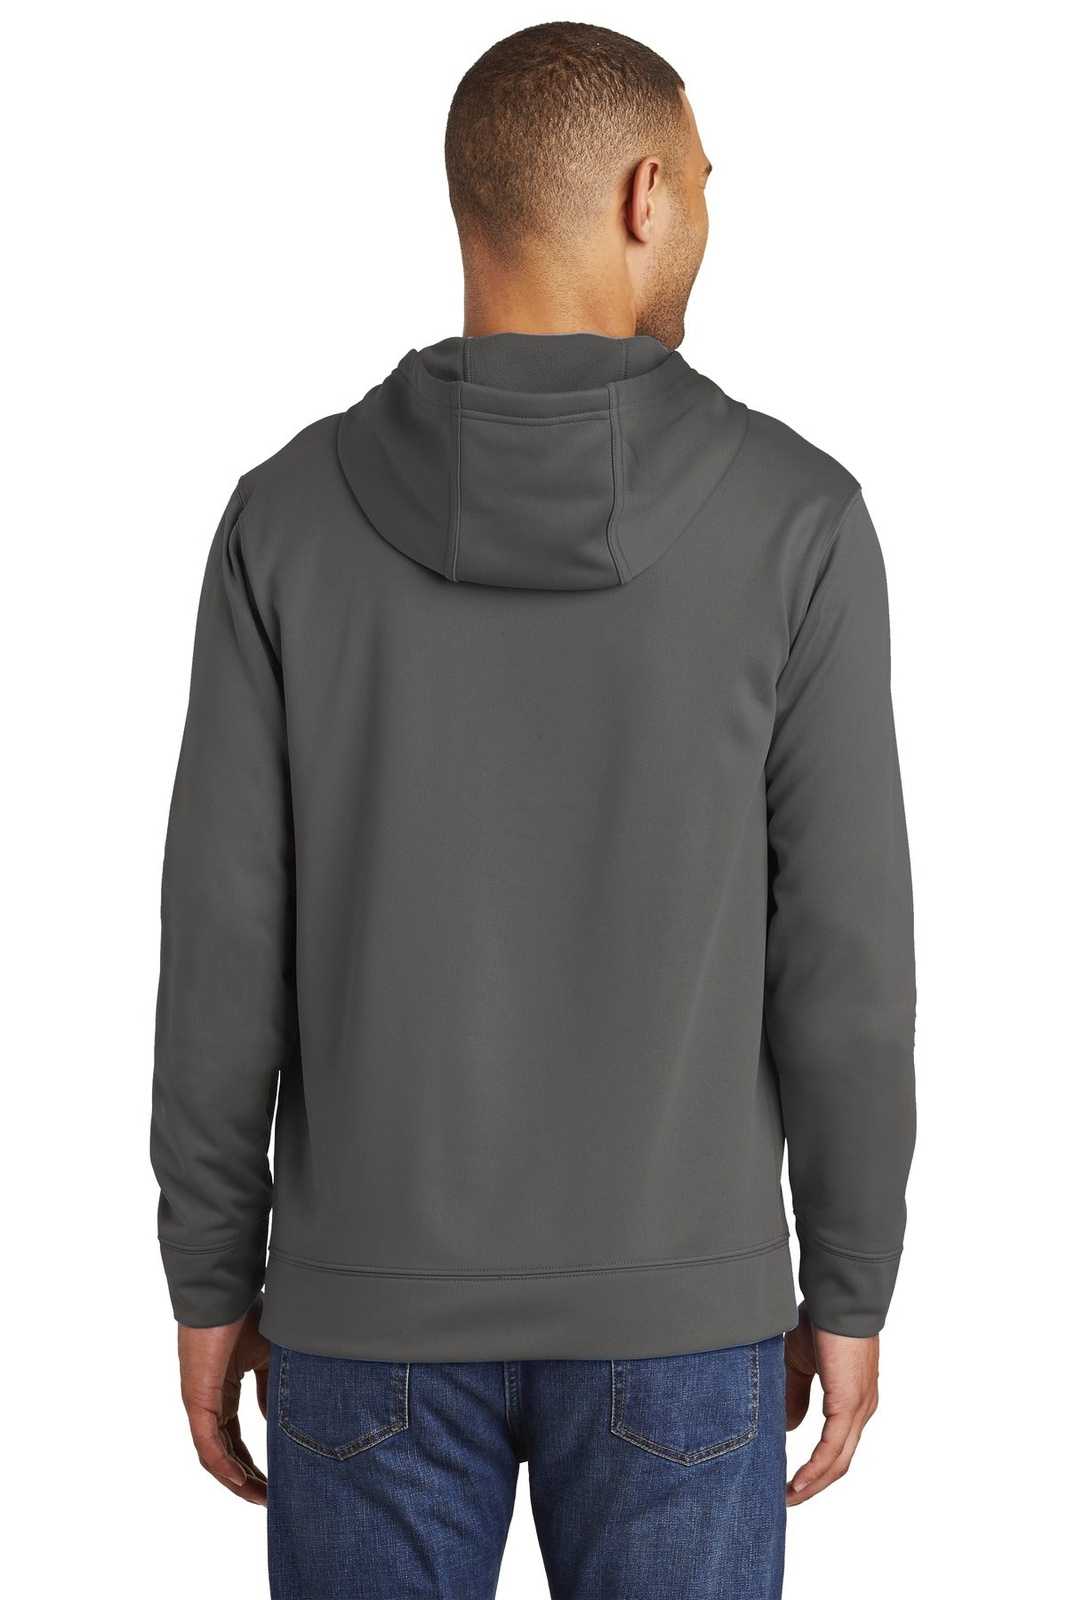 Port &amp; Company PC590H Performance Fleece Pullover Hooded Sweatshirt - Charcoal - HIT a Double - 2